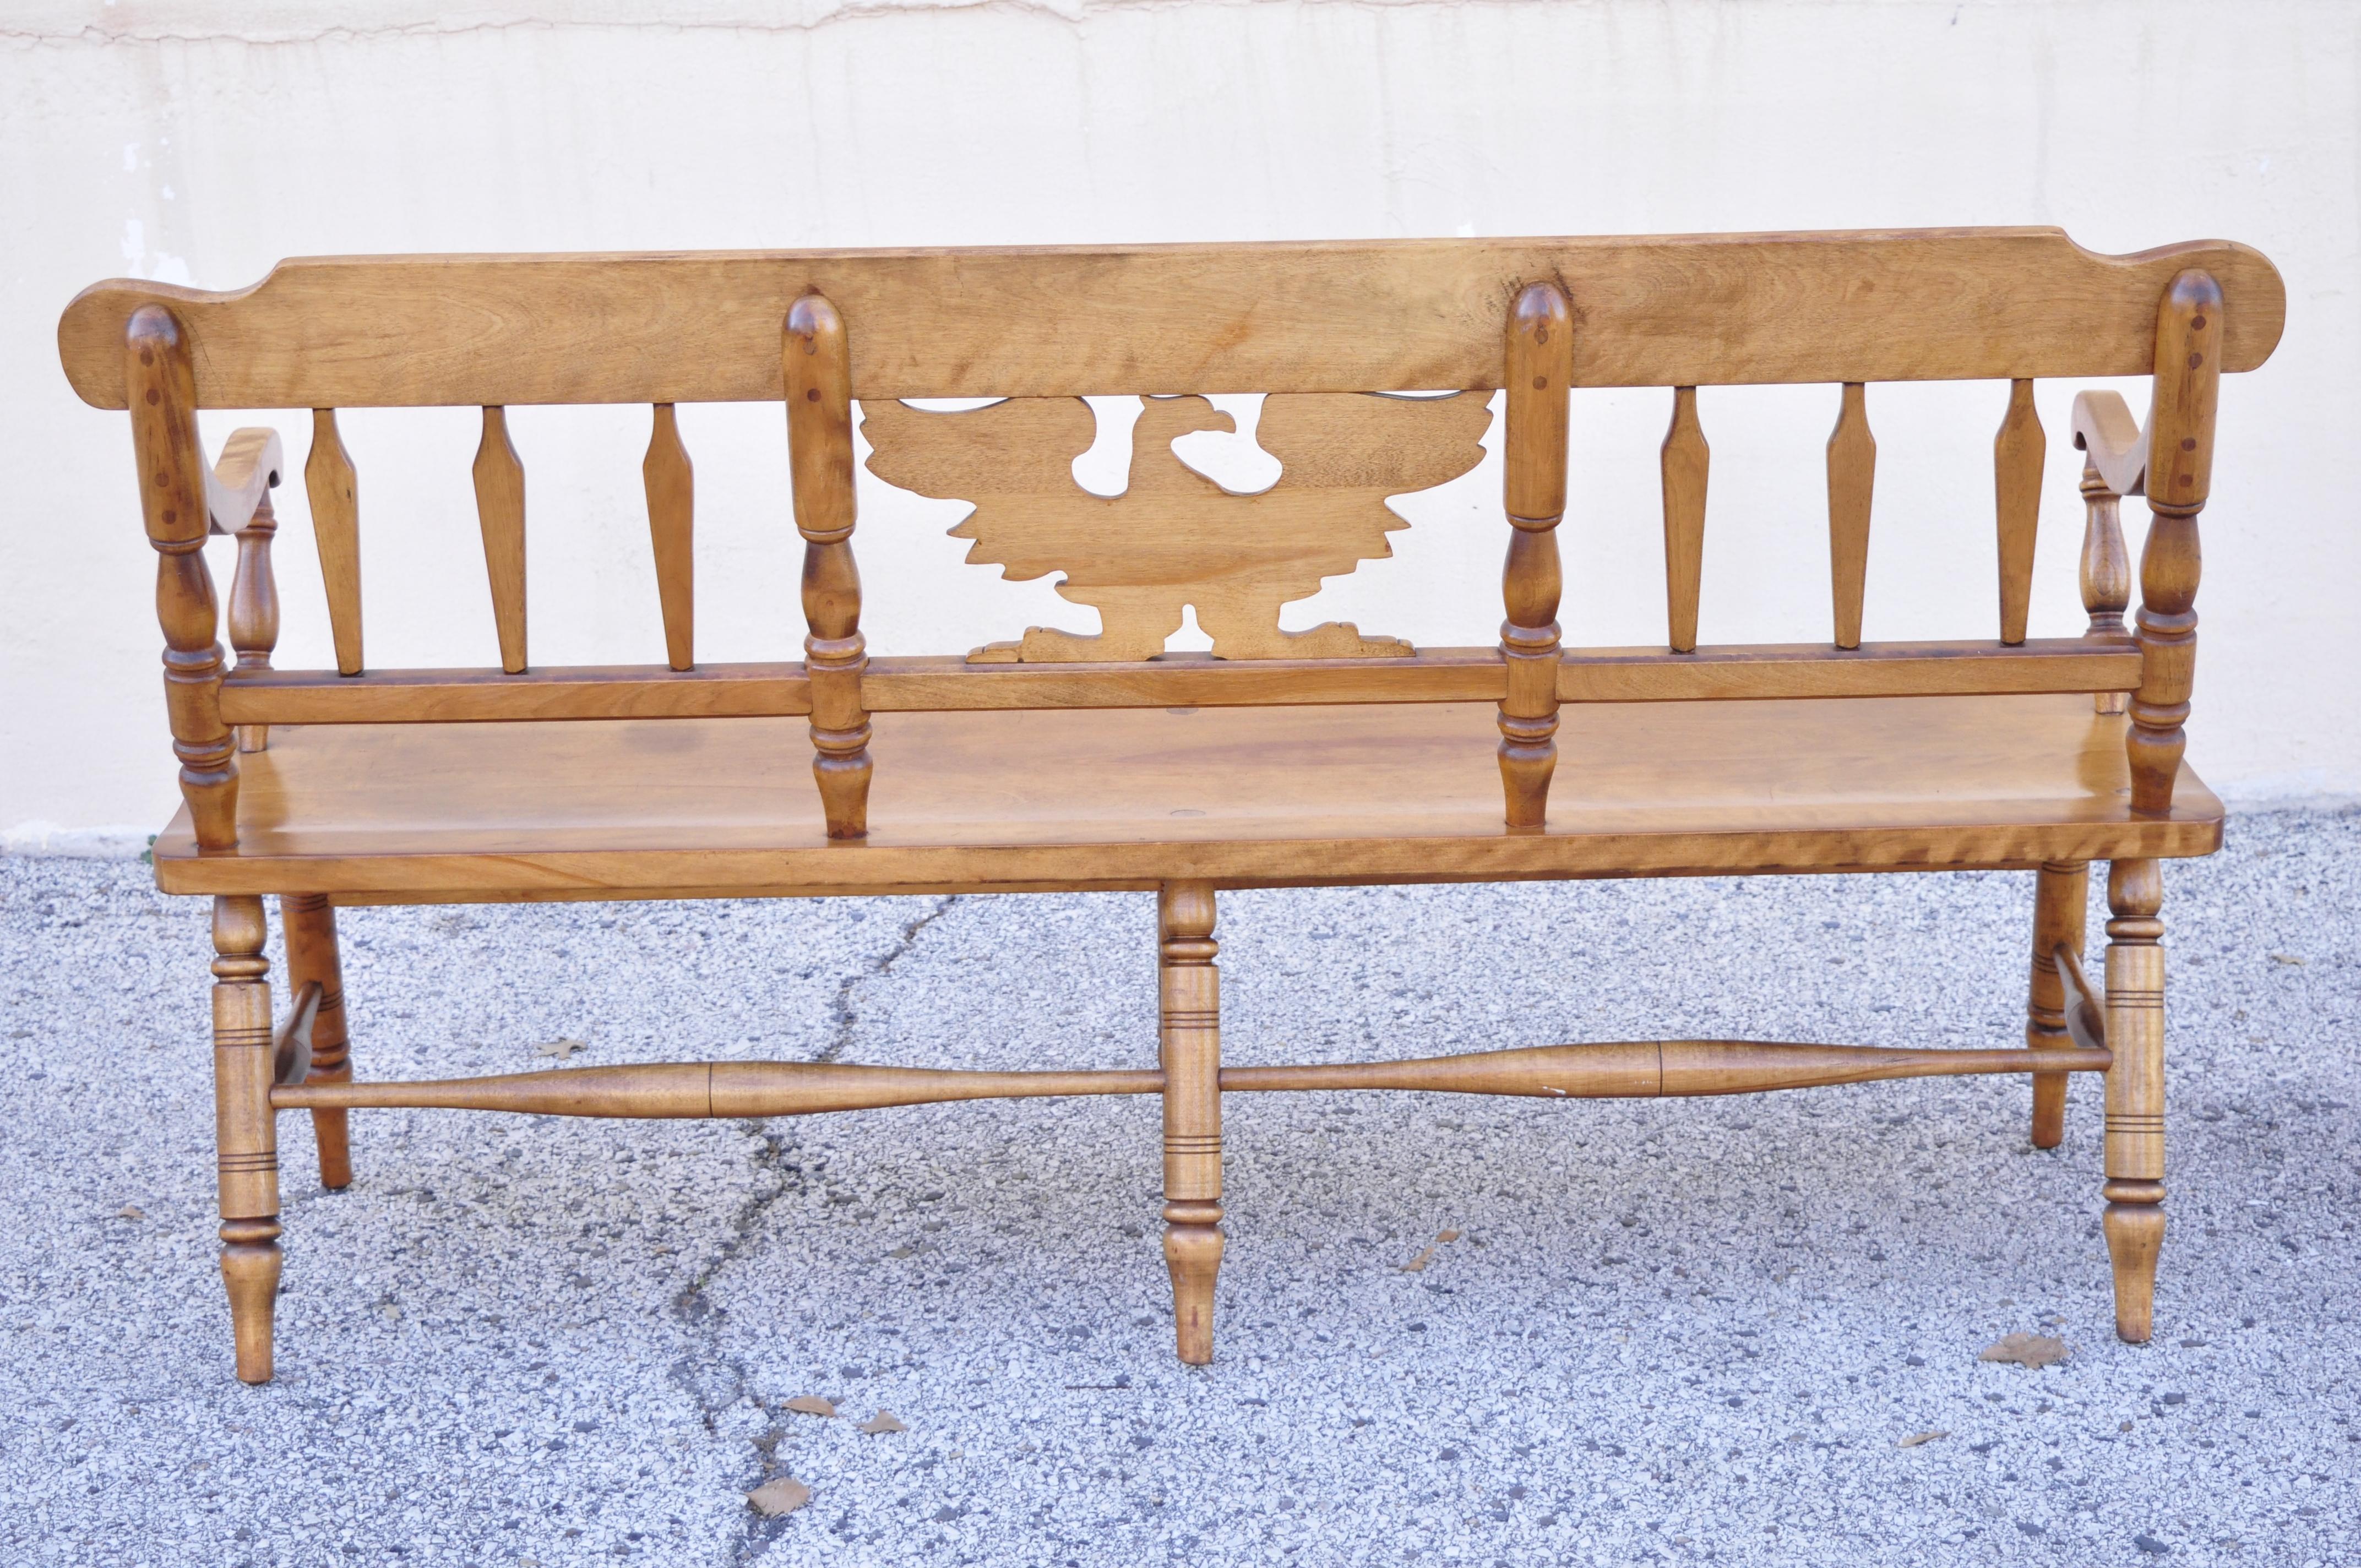 20th Century Vintage Cushman Maple Wood Settee Bench Carved Eagle Back Deacons Bench For Sale